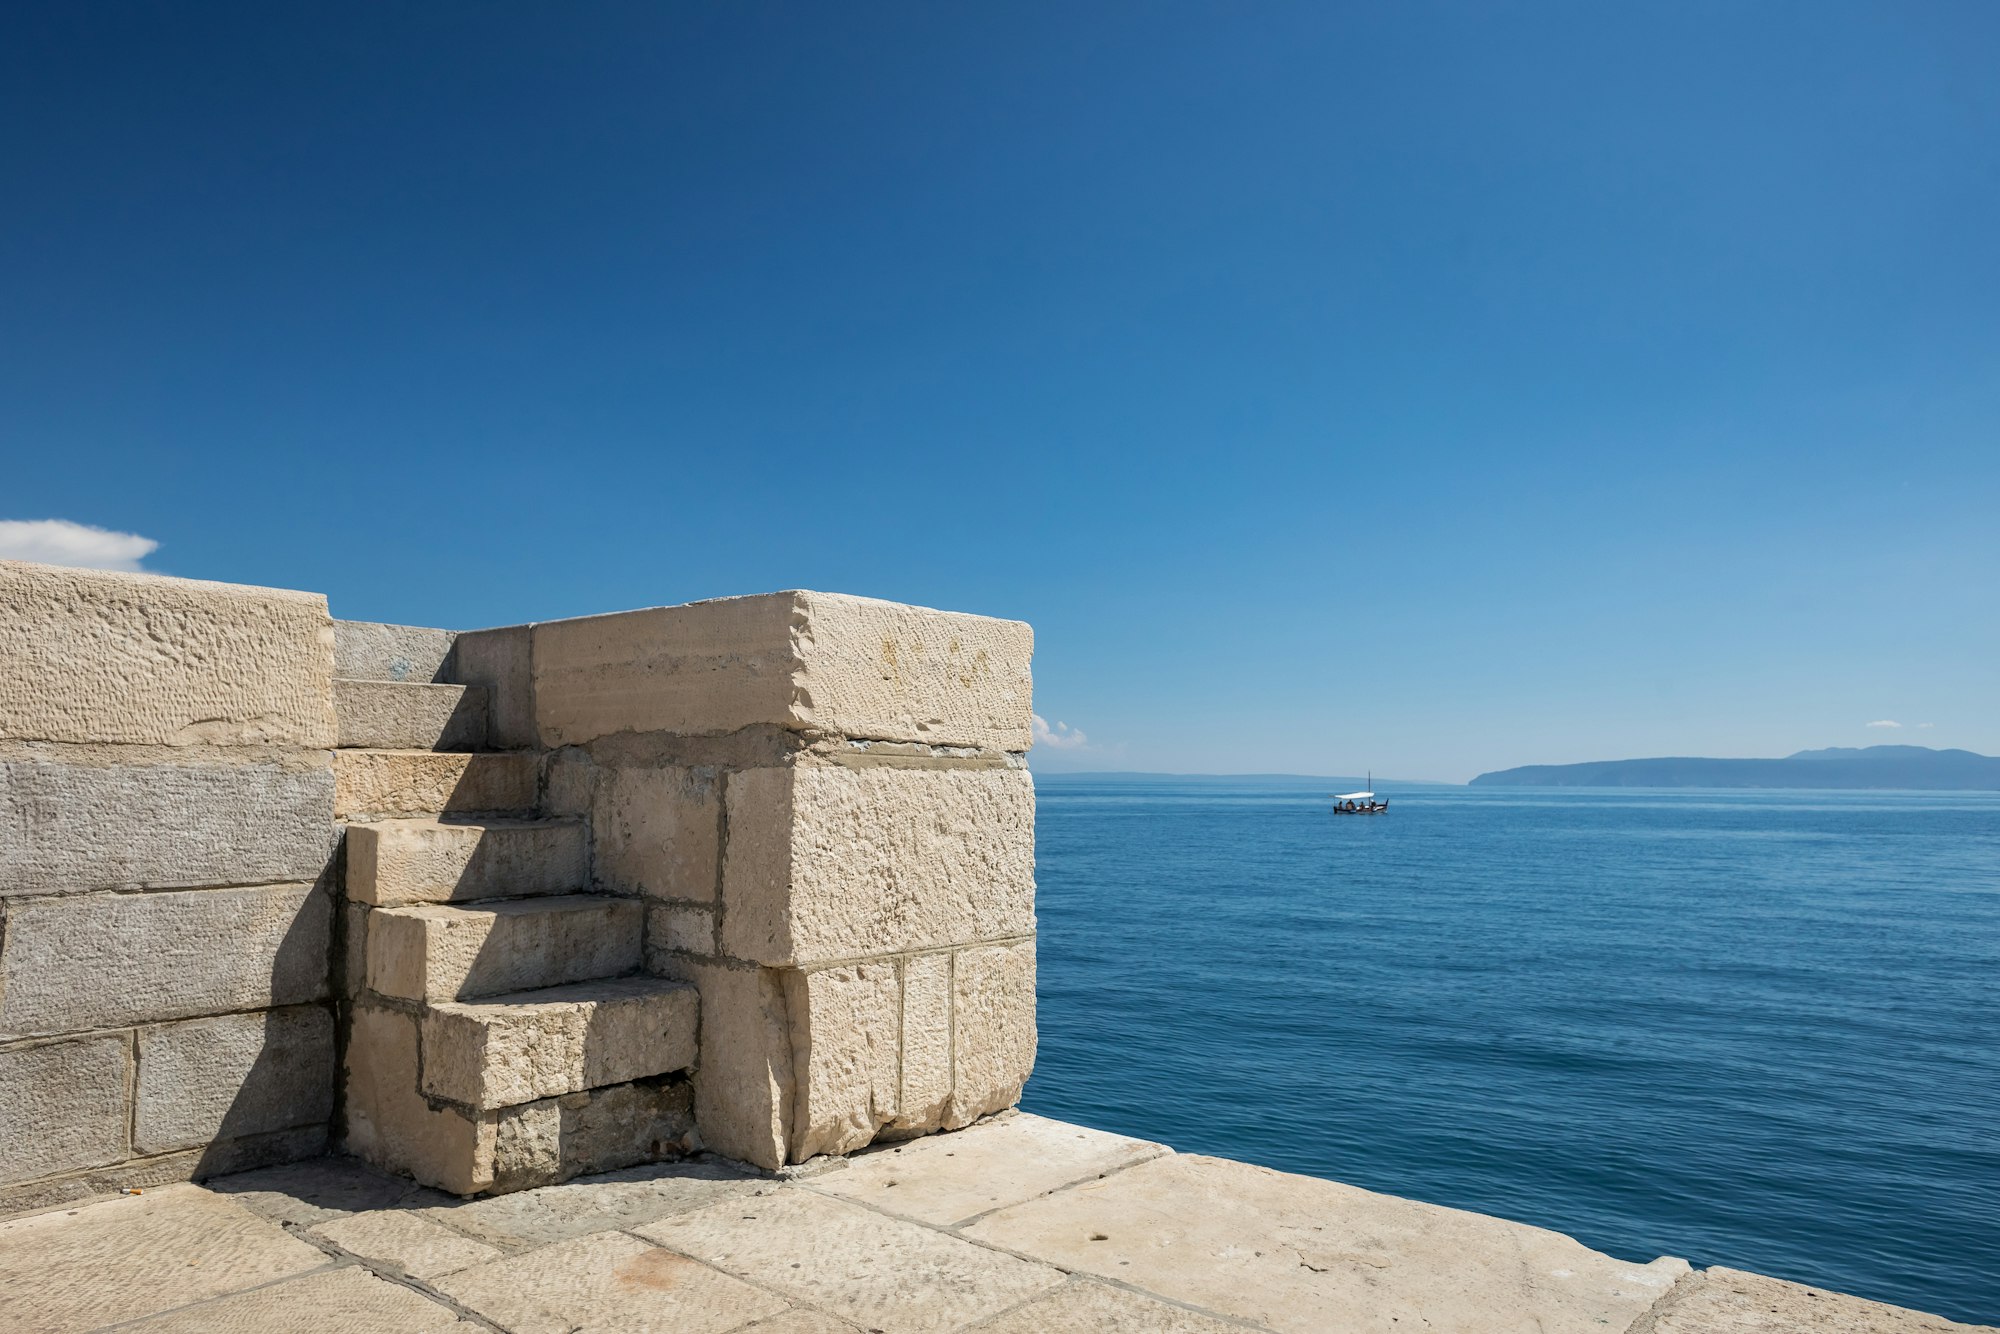 View of old concrete blocks in the bay of Lovran, Croatia on a blue sky background